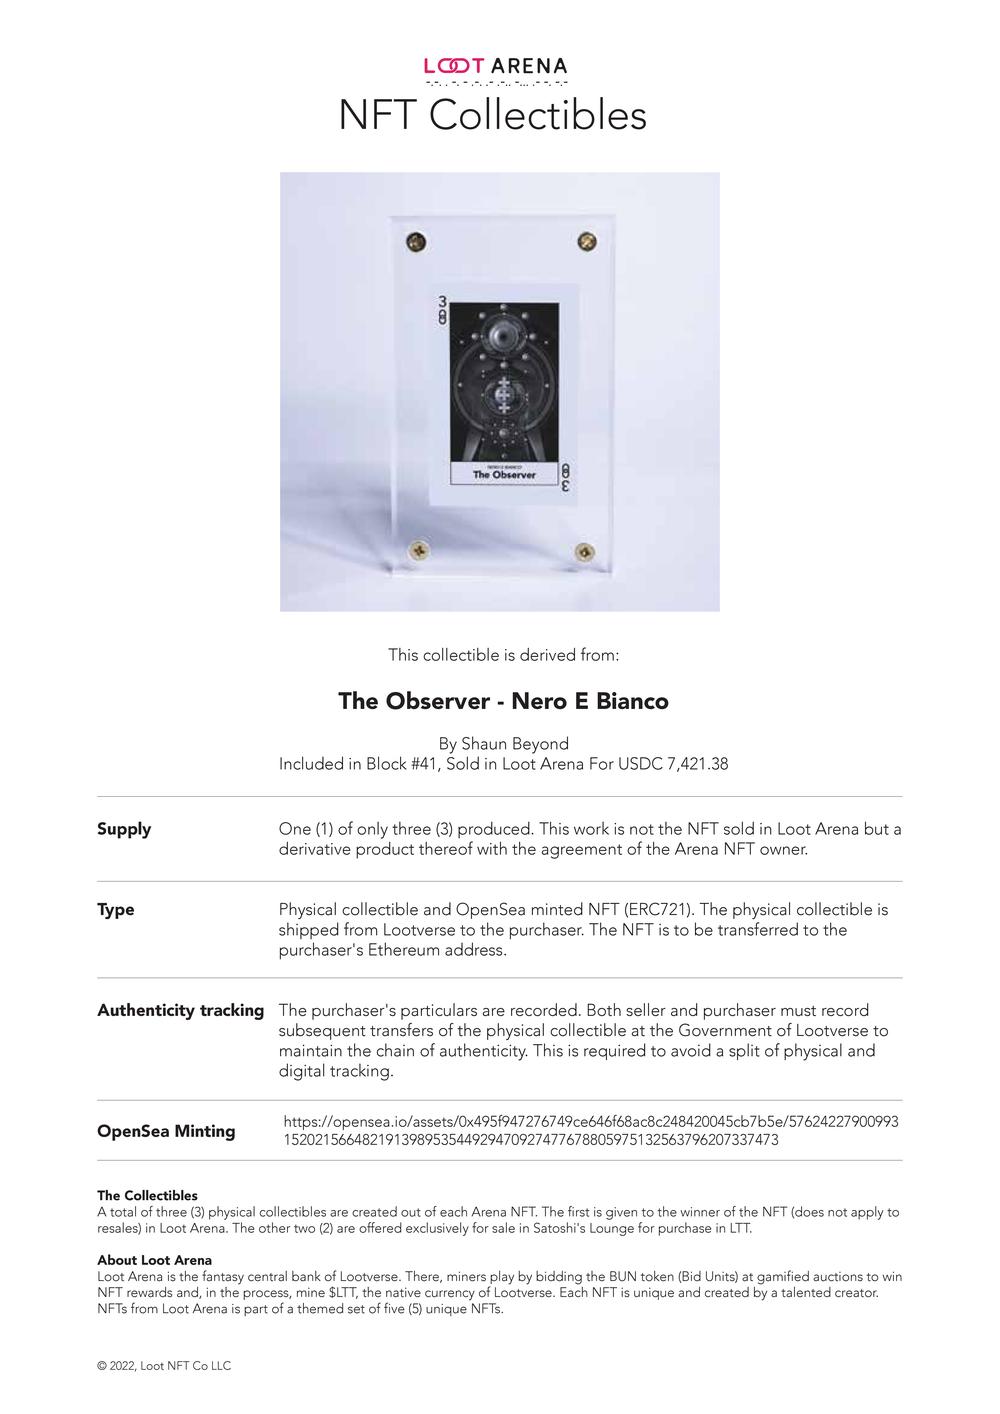 The Observer_#1 Collectible_Contract.pdf